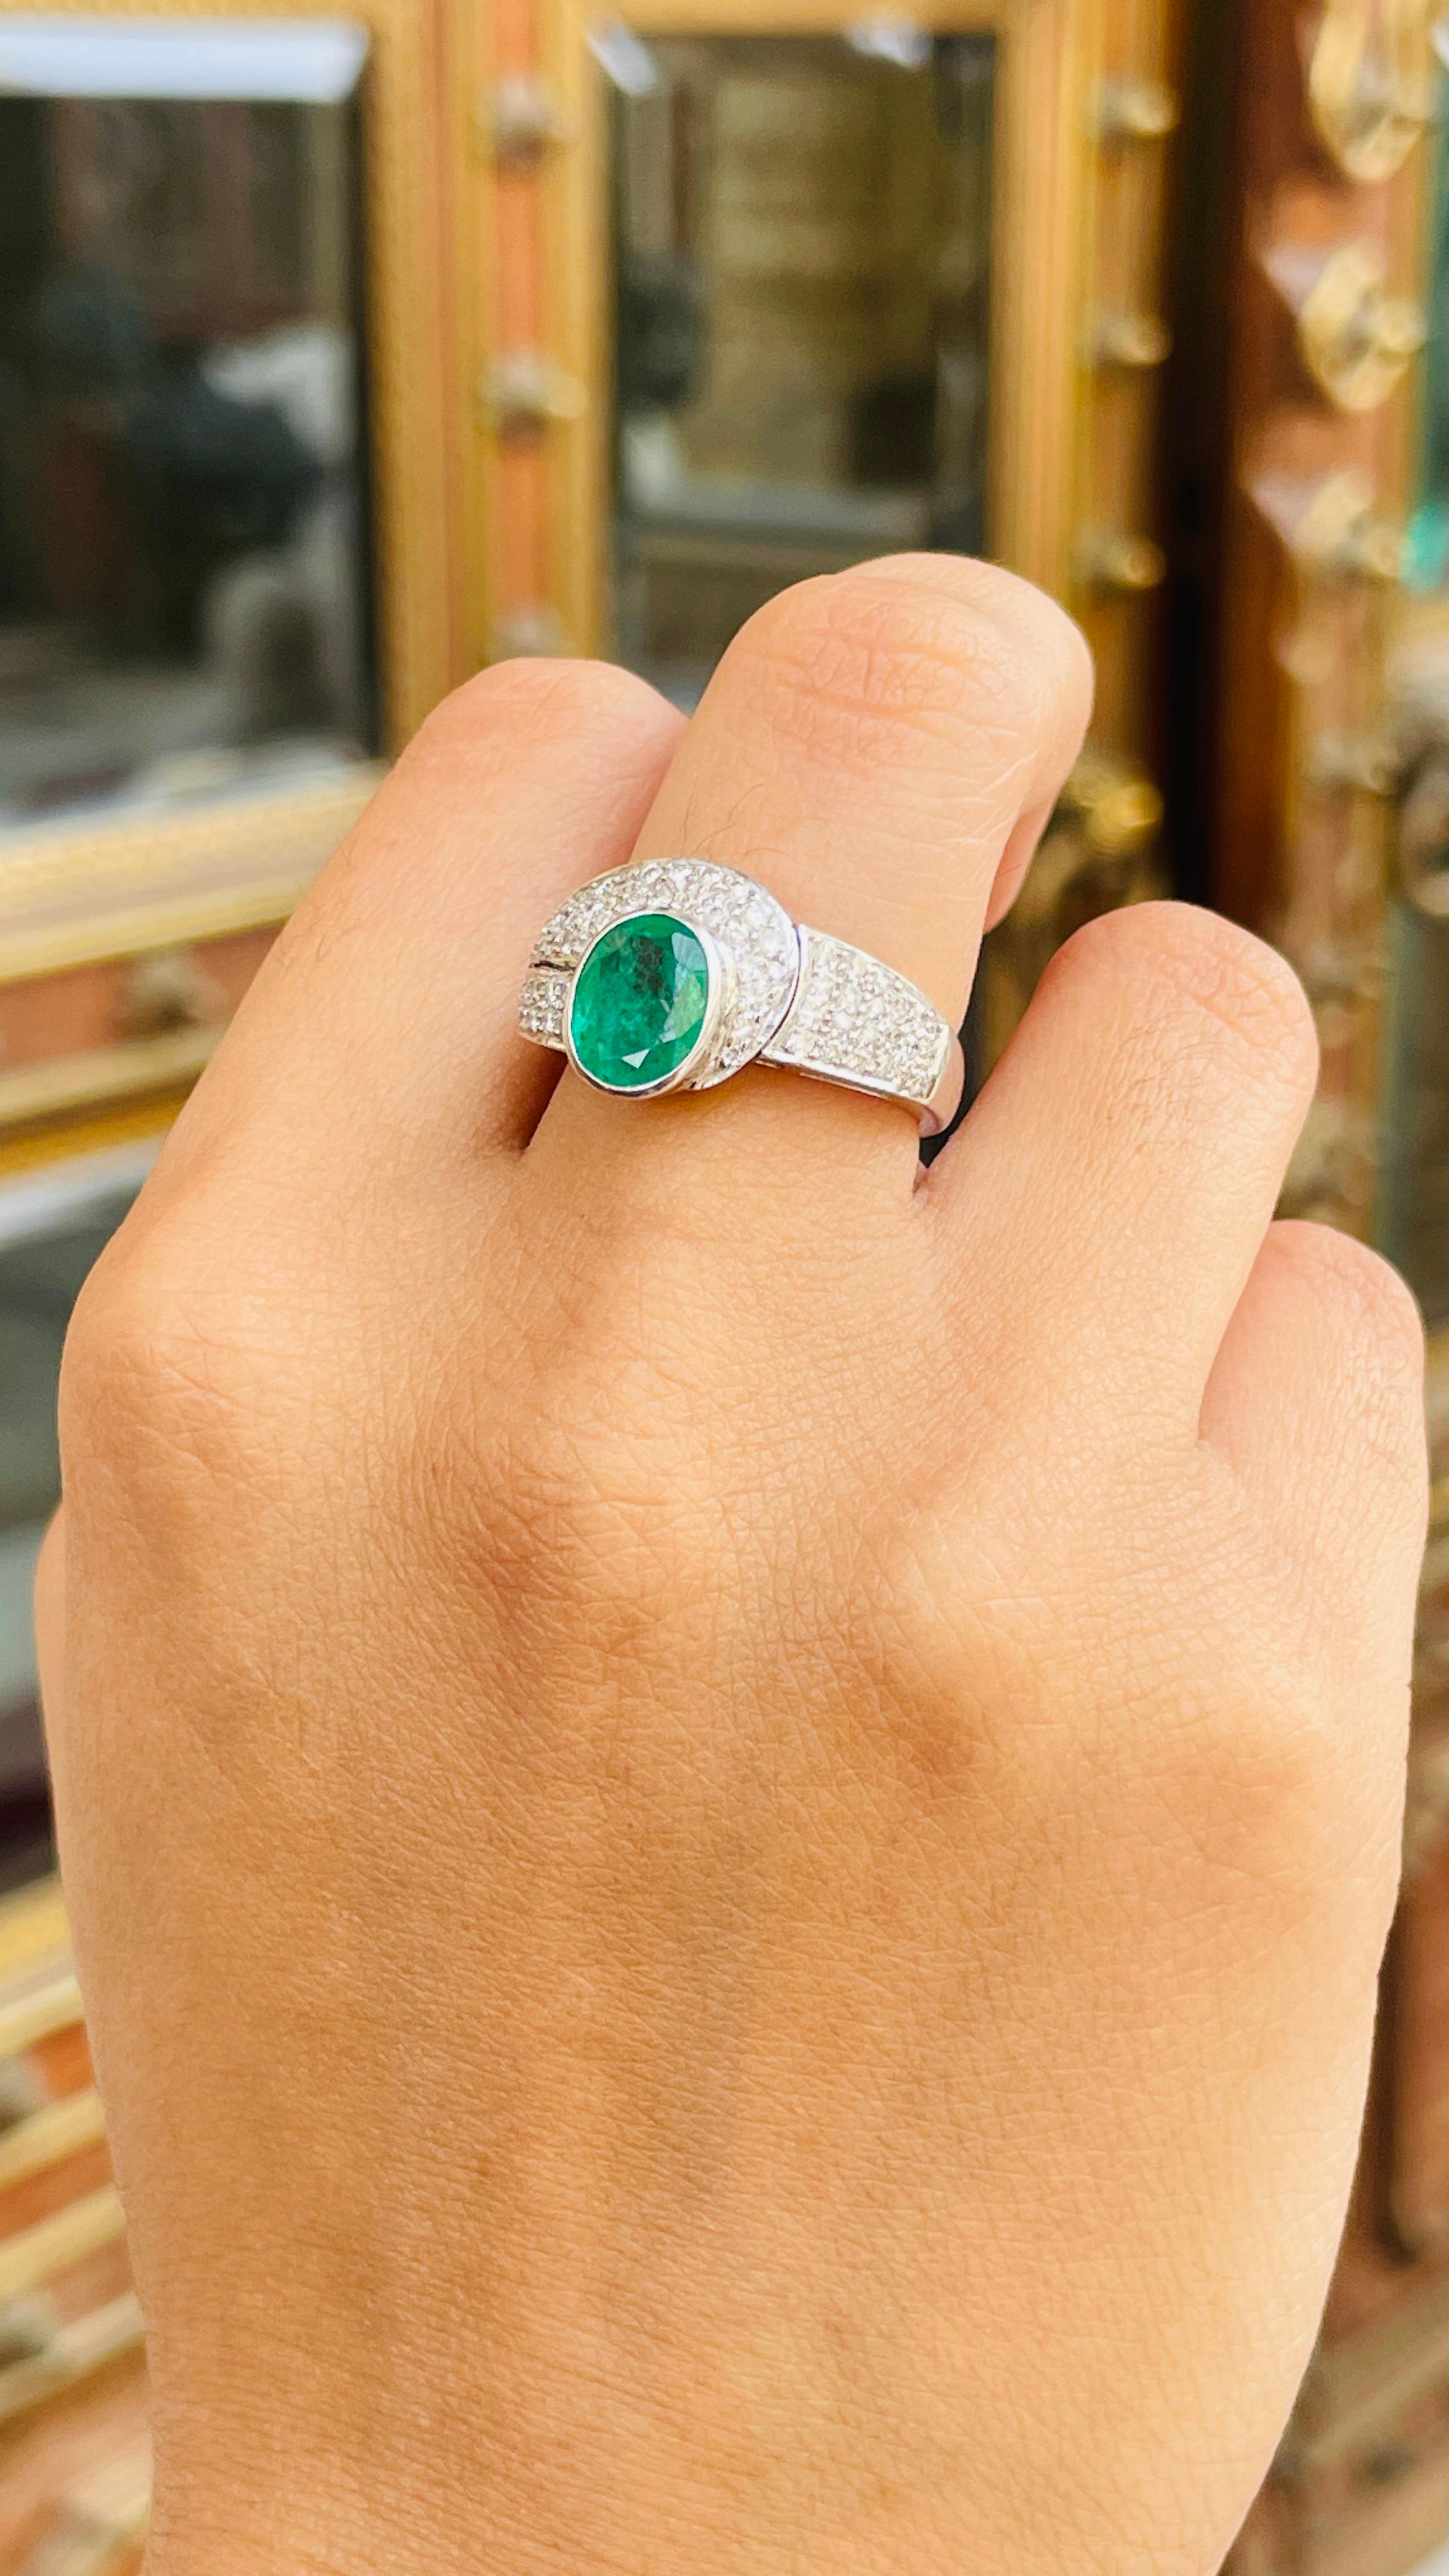 For Sale:  2.45 Carat Emerald and Diamond Ring in 18K White Gold  13